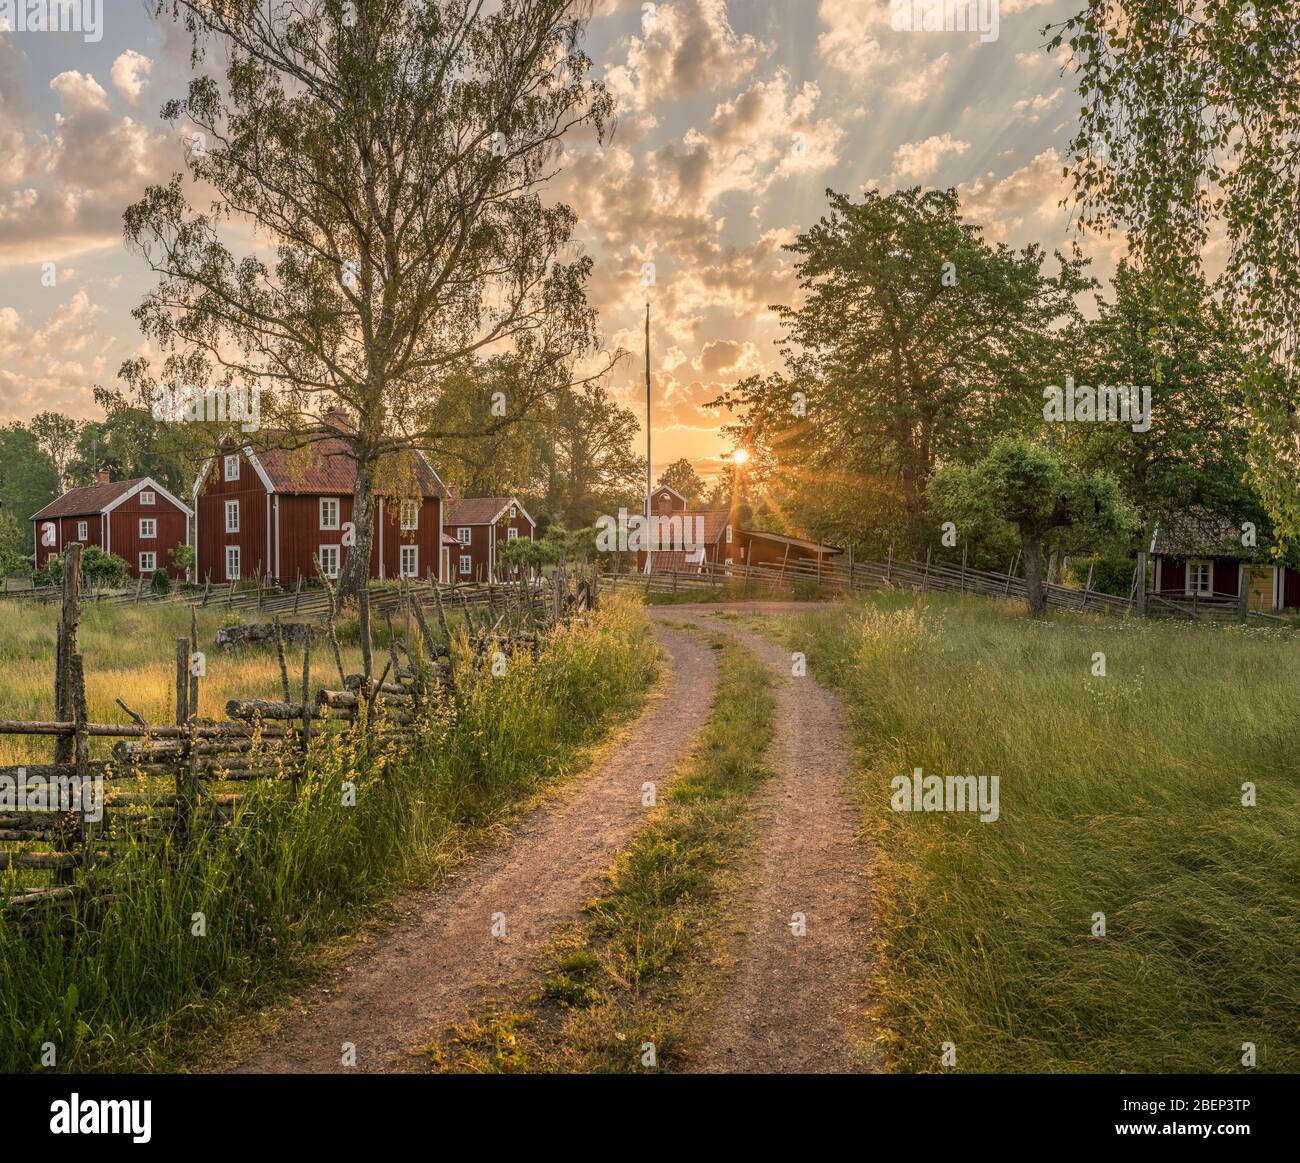 Small country road and old traditional red cottages at sunrise in a rural landscape, the village Stensjo by. Oskarshamn, Smaland, Sweden, Scandinavia Stock Photo